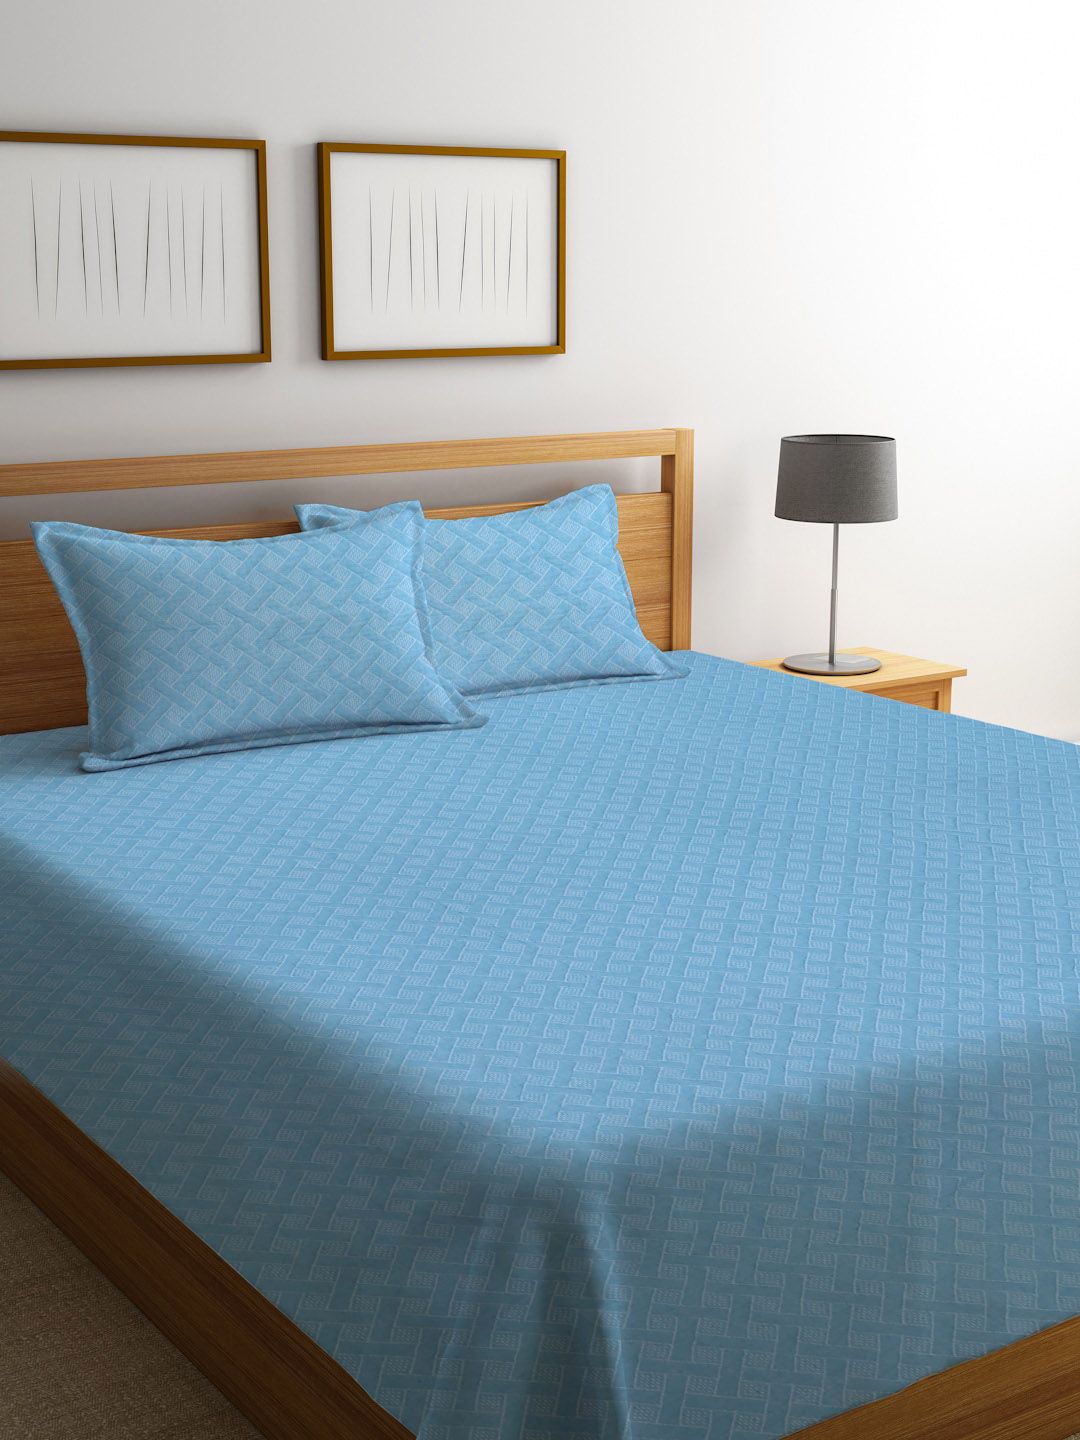 MULTITEX Blue Solid Cotton Queen Bed Covers Price in India